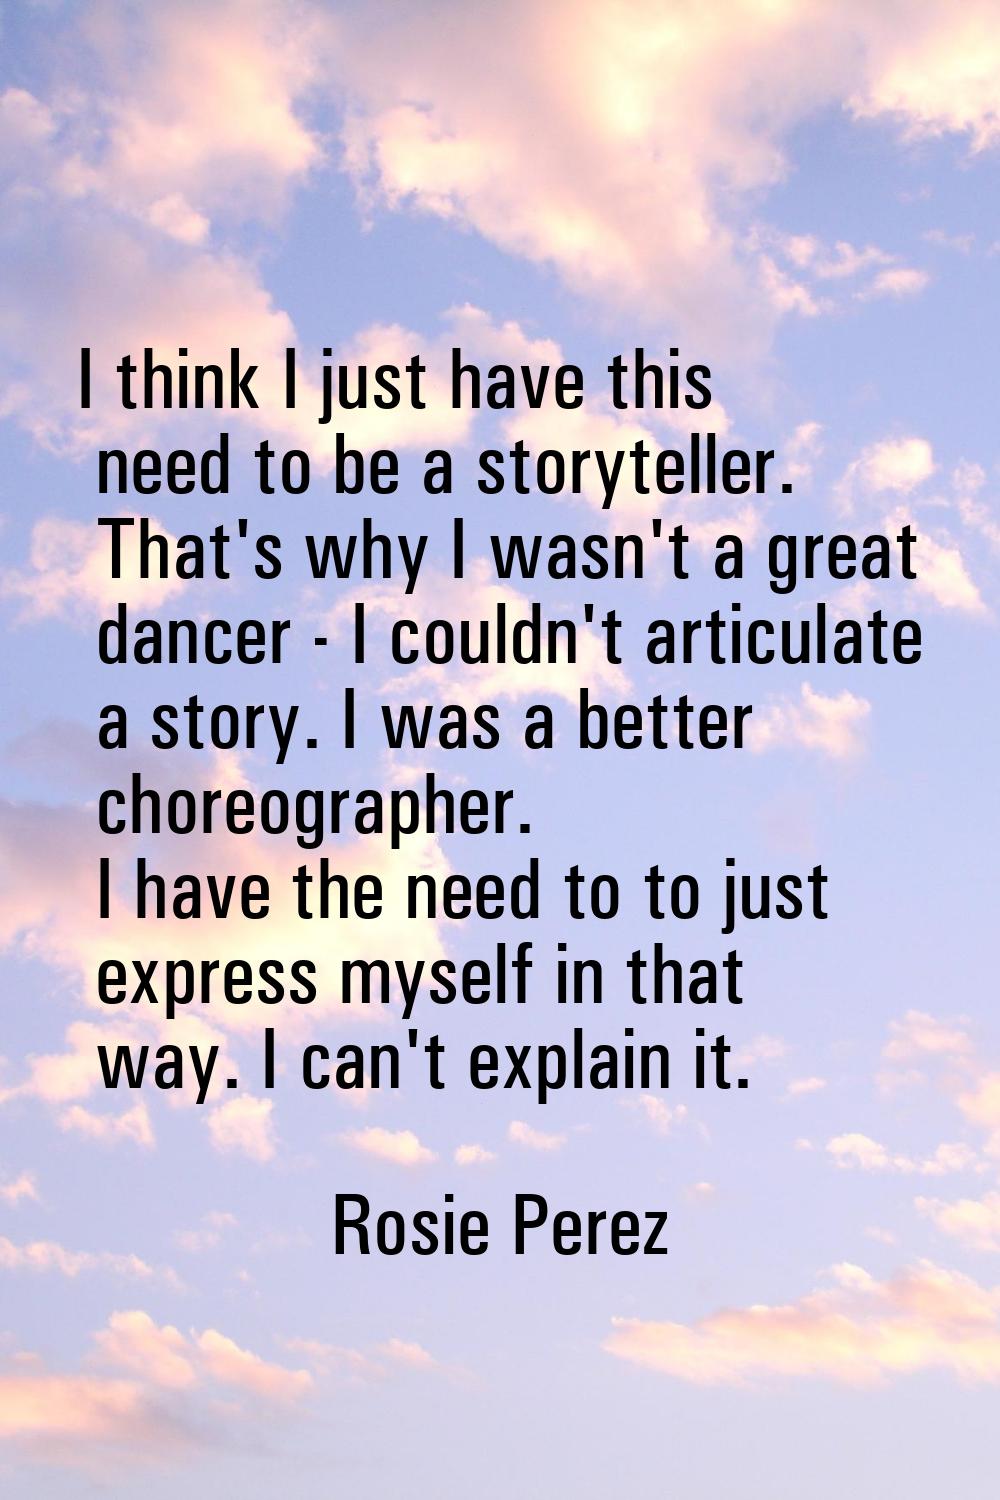 I think I just have this need to be a storyteller. That's why I wasn't a great dancer - I couldn't 